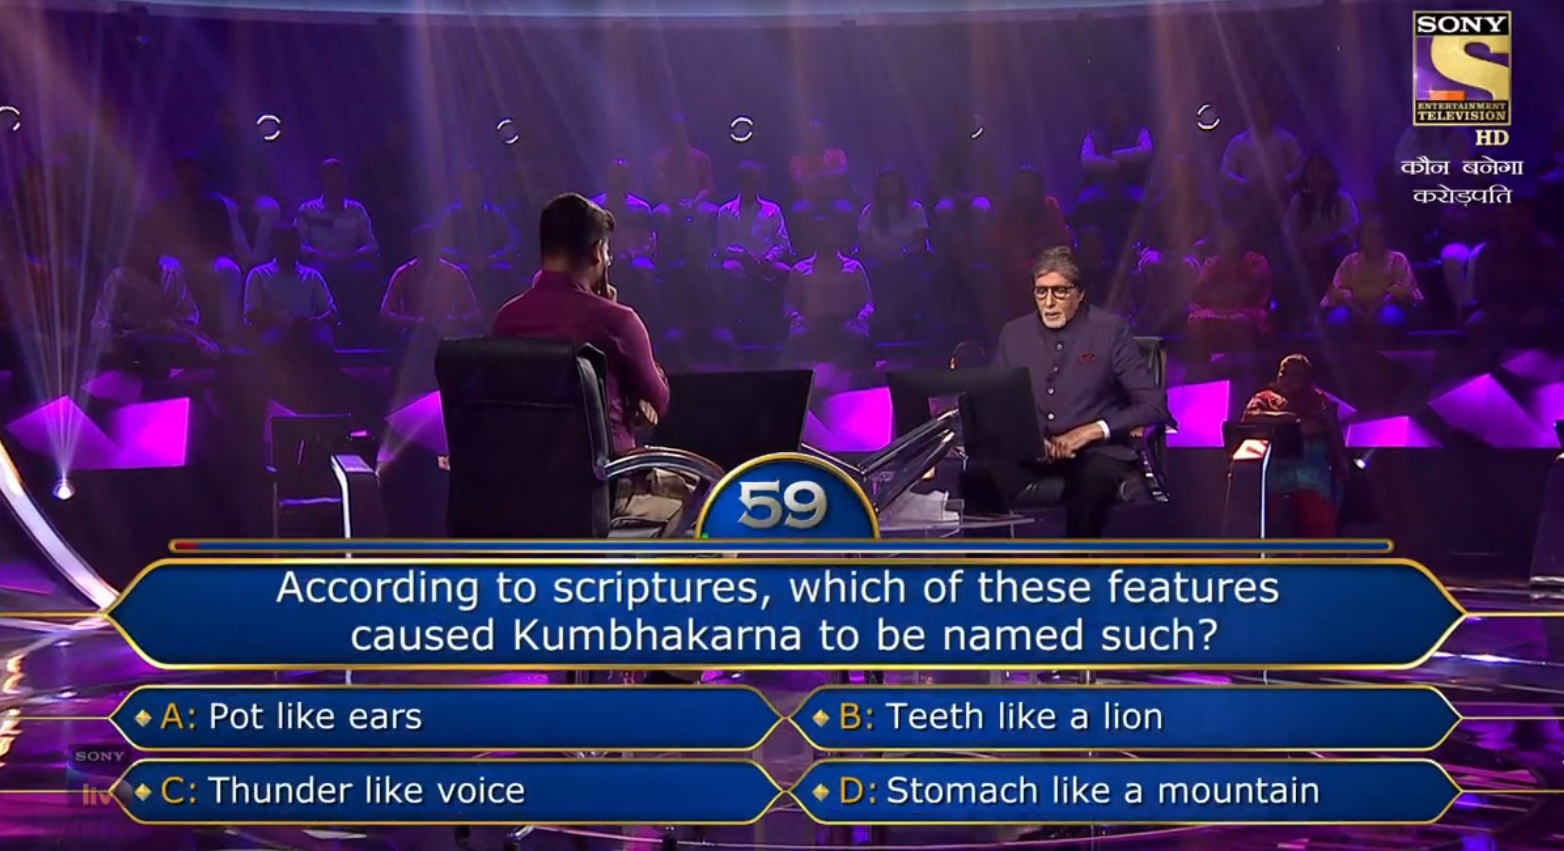 Ques : According to scriptures, which of these features caused Kumbhakarna to be named such?